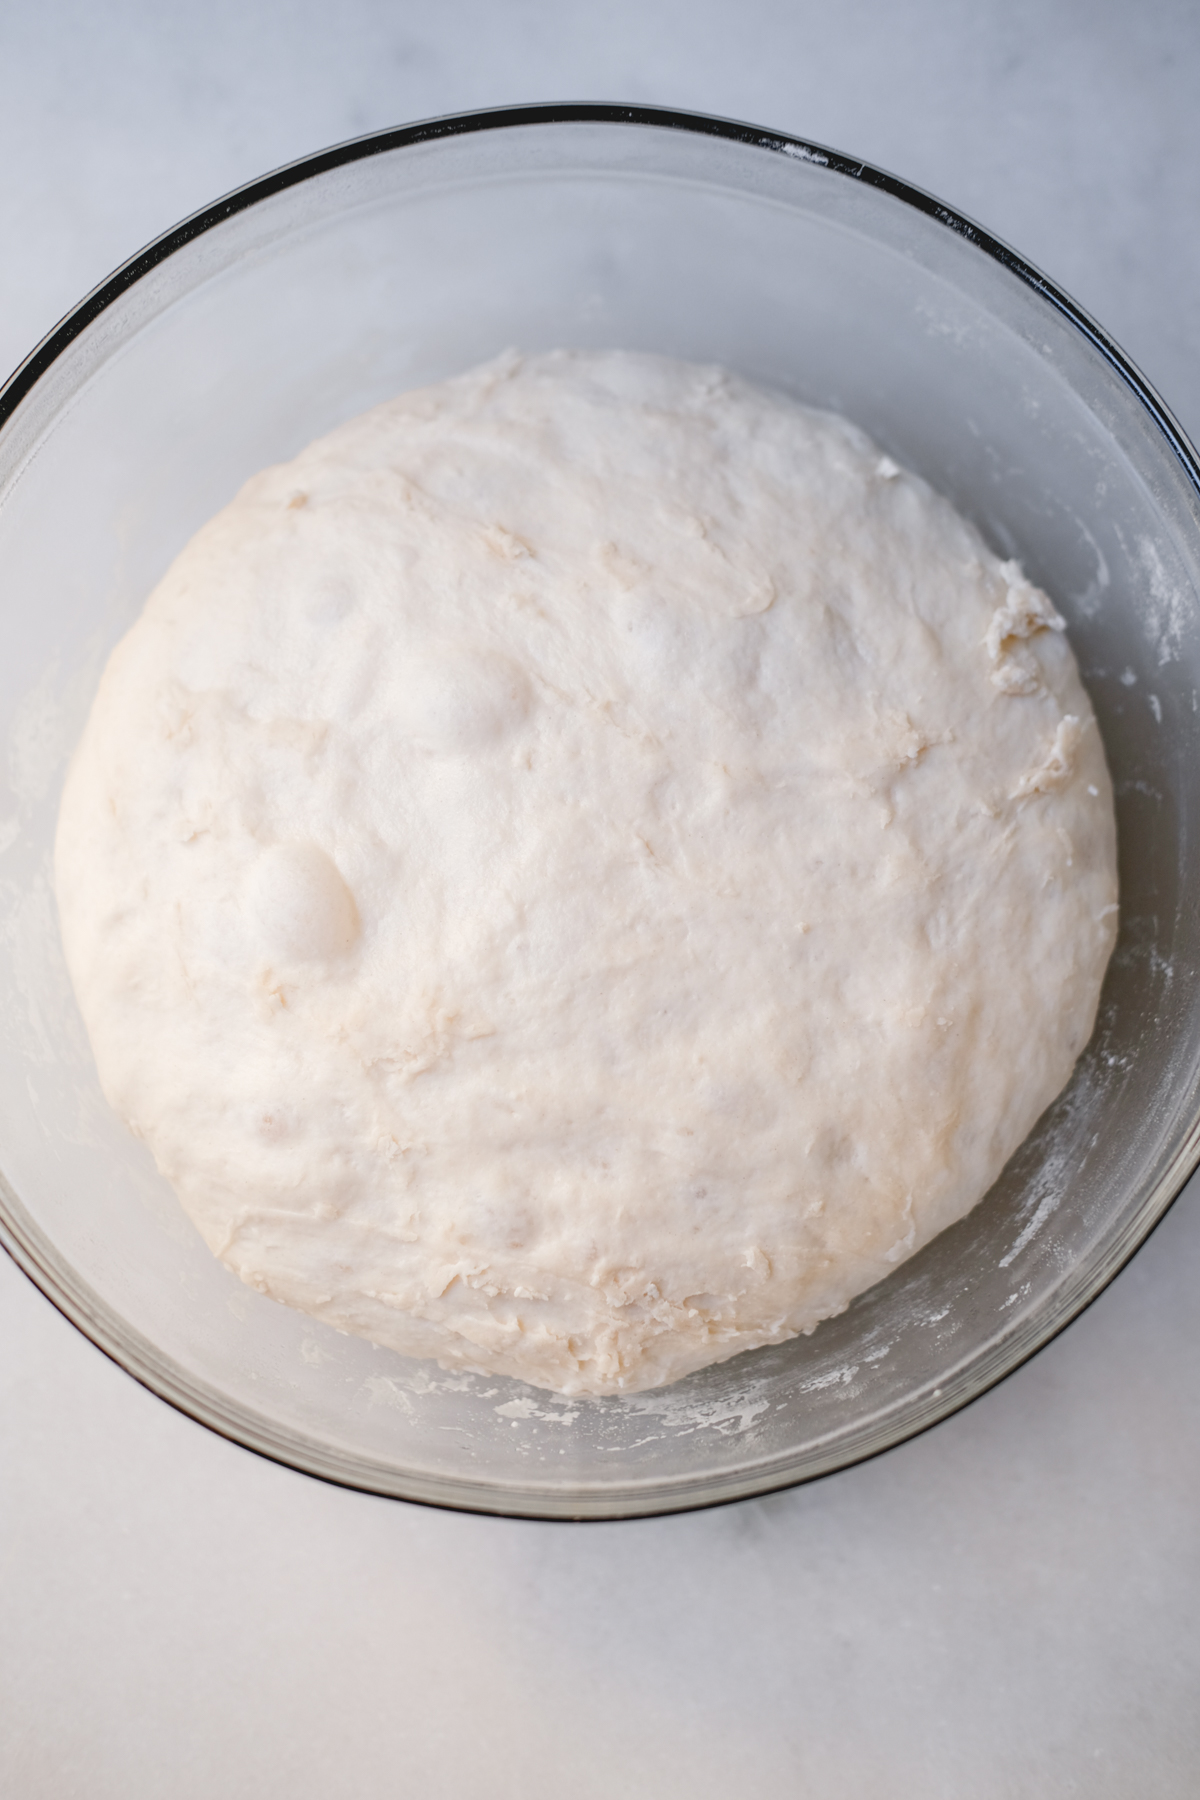 sourdough bread dough after rising overnight for 8 to 10 hours